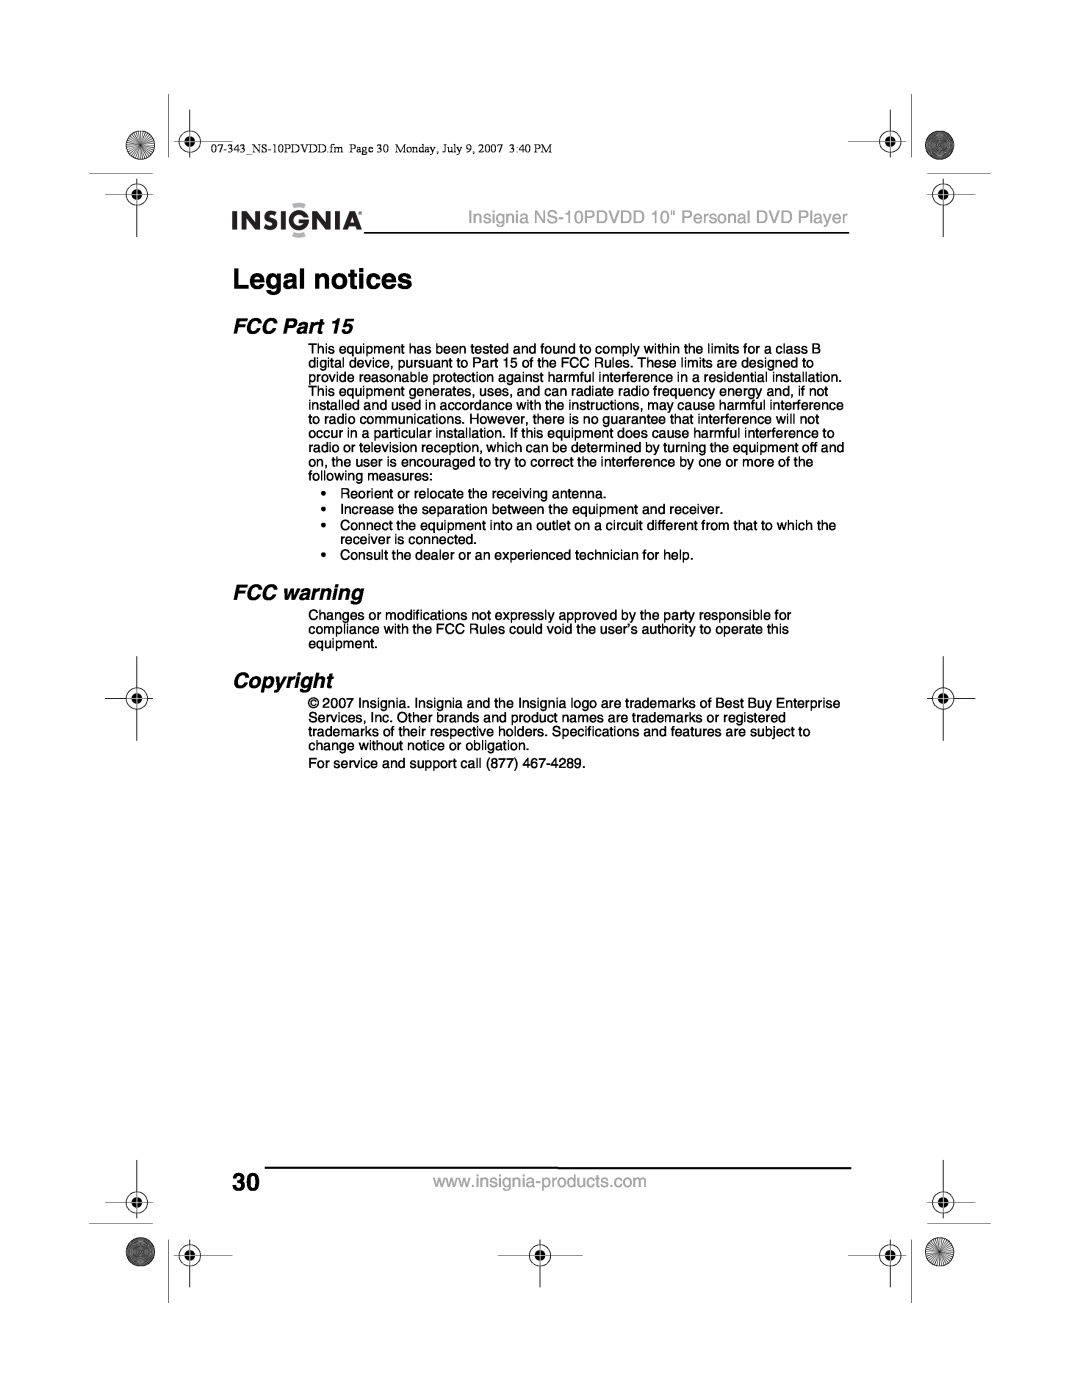 Insignia manual Legal notices, FCC Part, FCC warning, Copyright, Insignia NS-10PDVDD 10 Personal DVD Player 